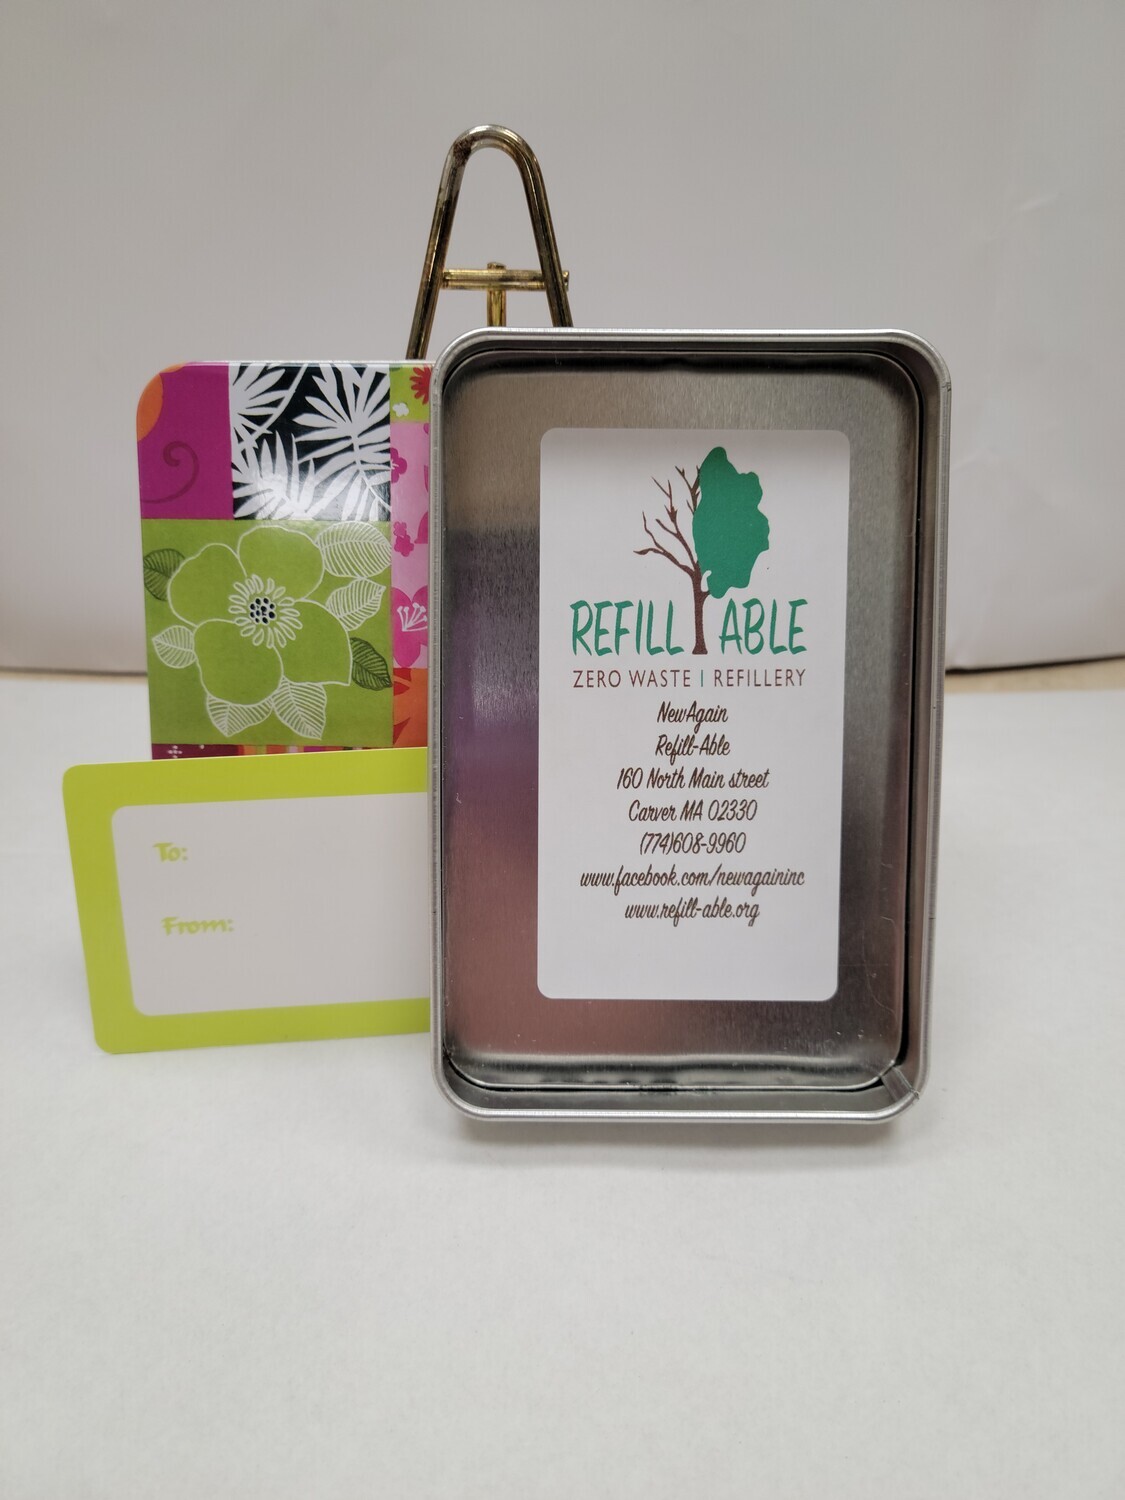 Refill-Able
Digital Gift Card